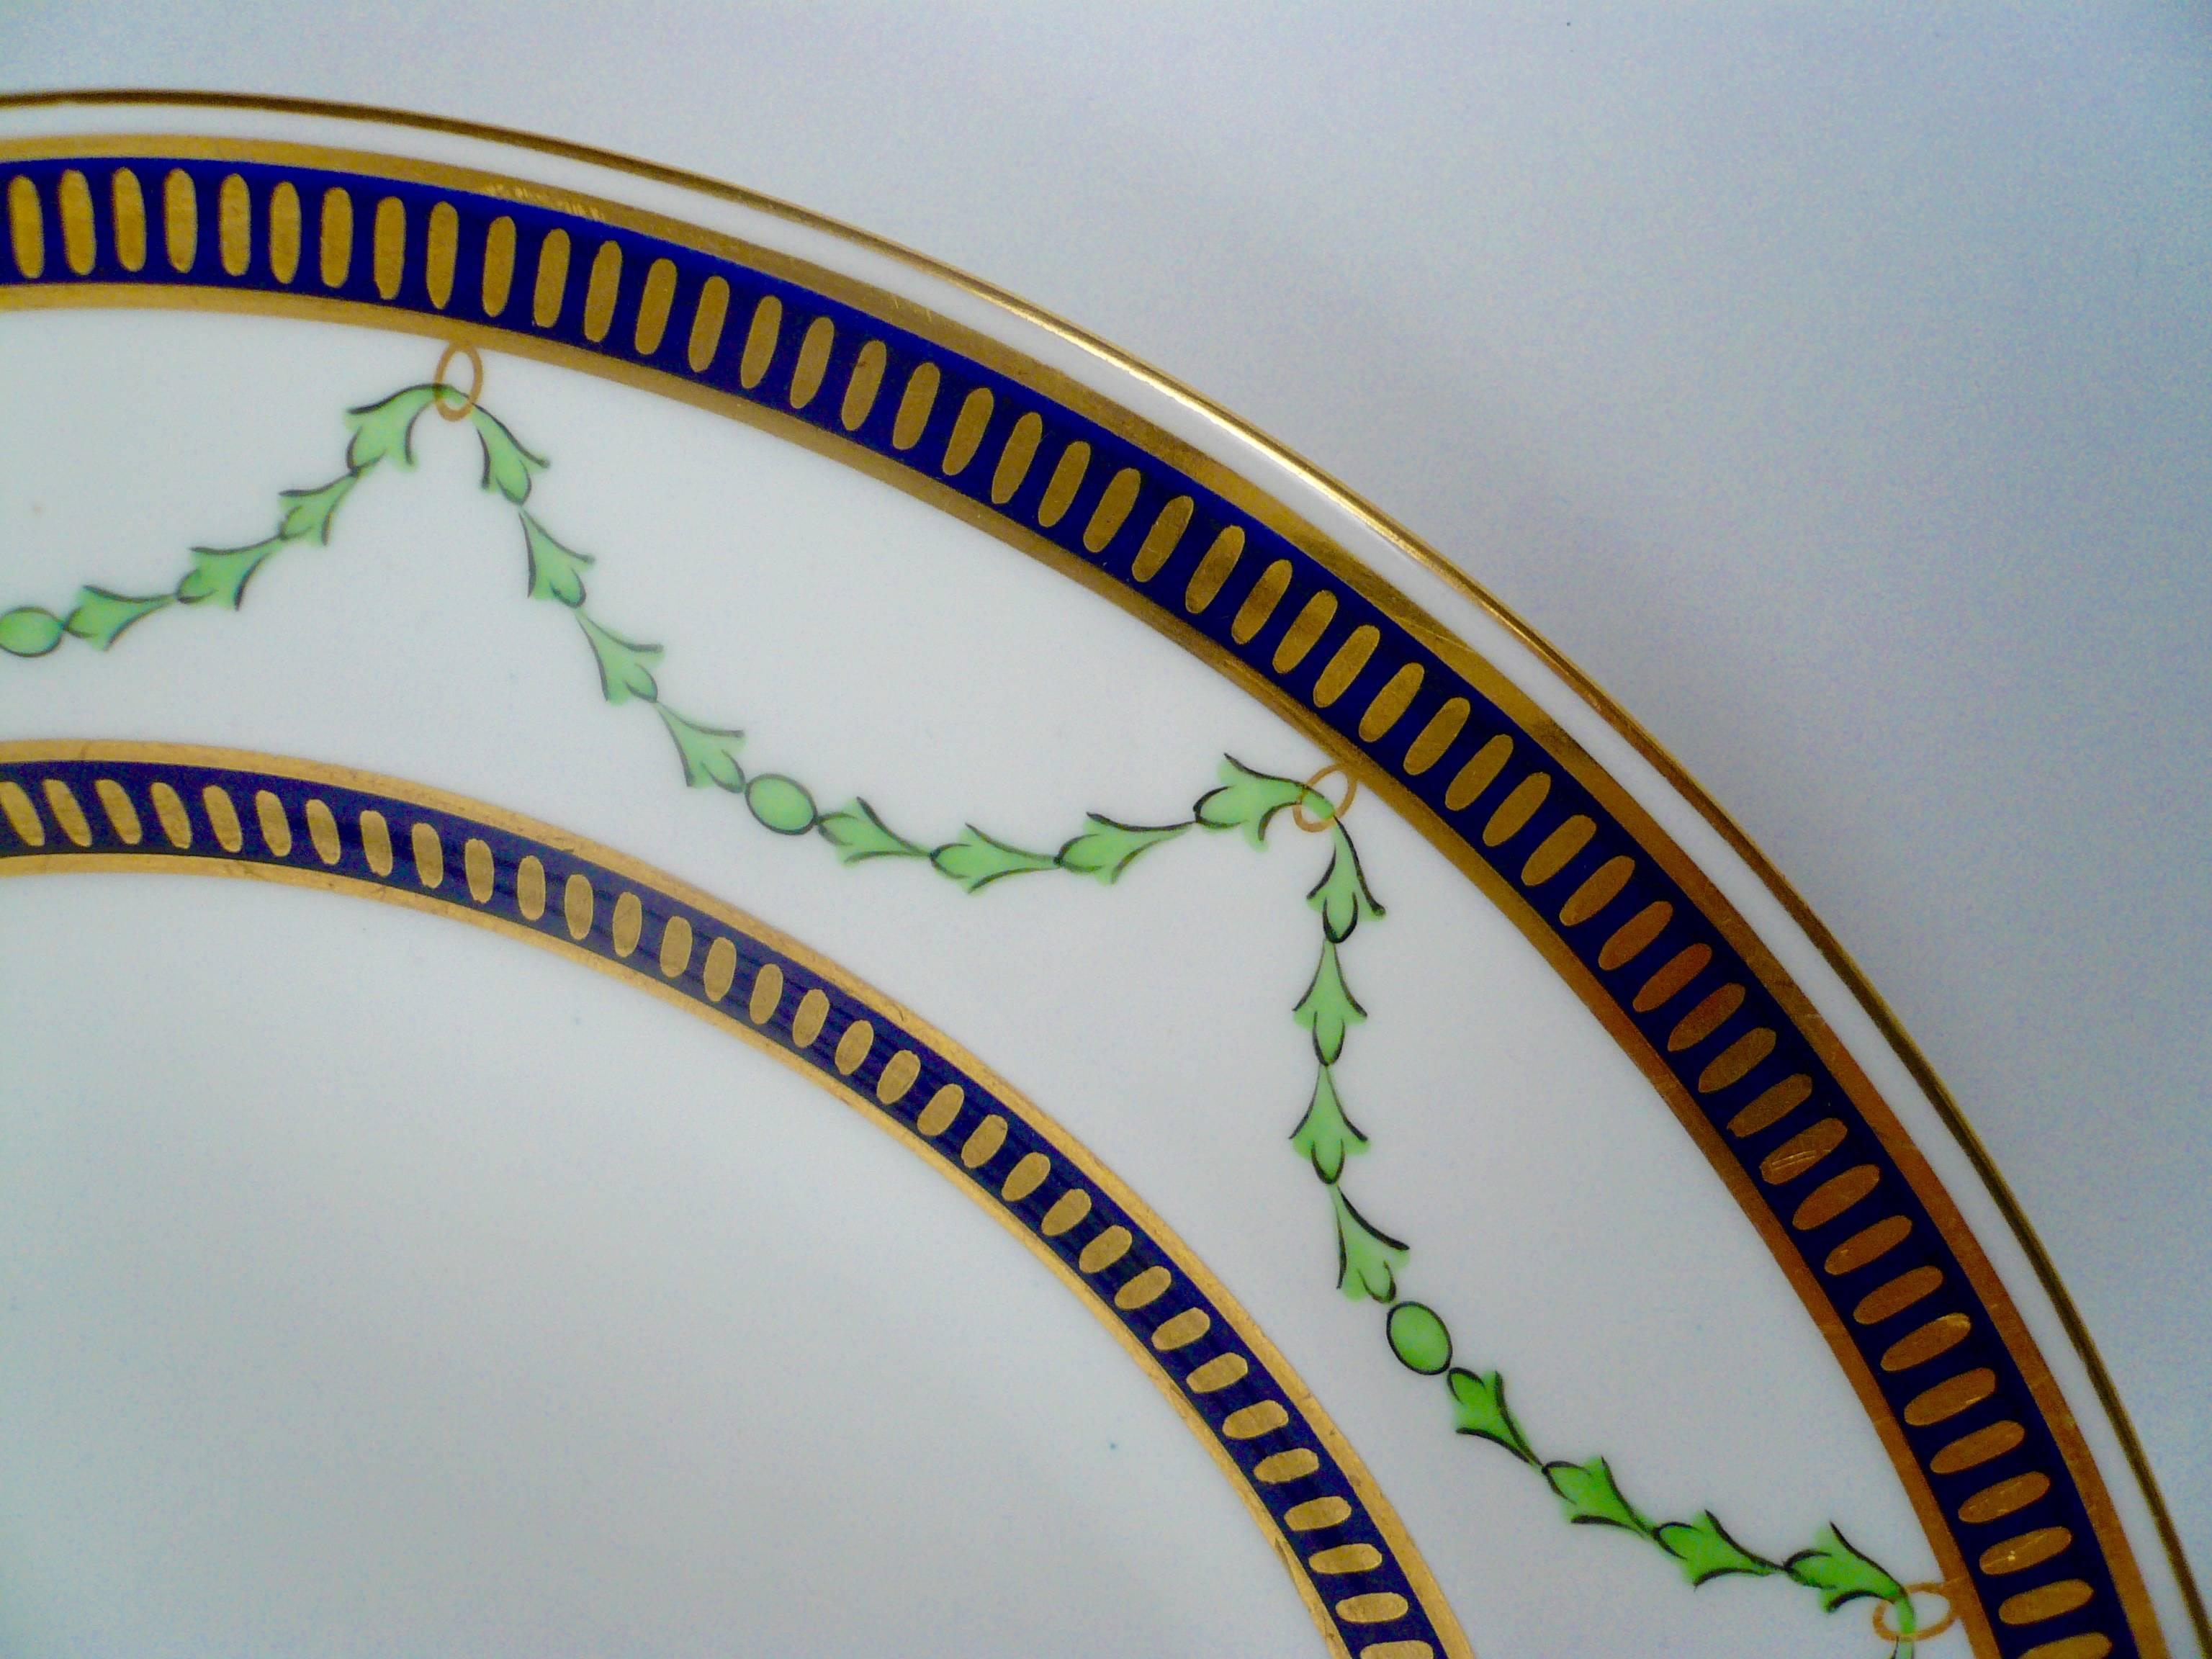 These cobalt and gilt derby porcelain plates feature green bellflower swags.
They were retailed at Phillips's of Mount Street, London.